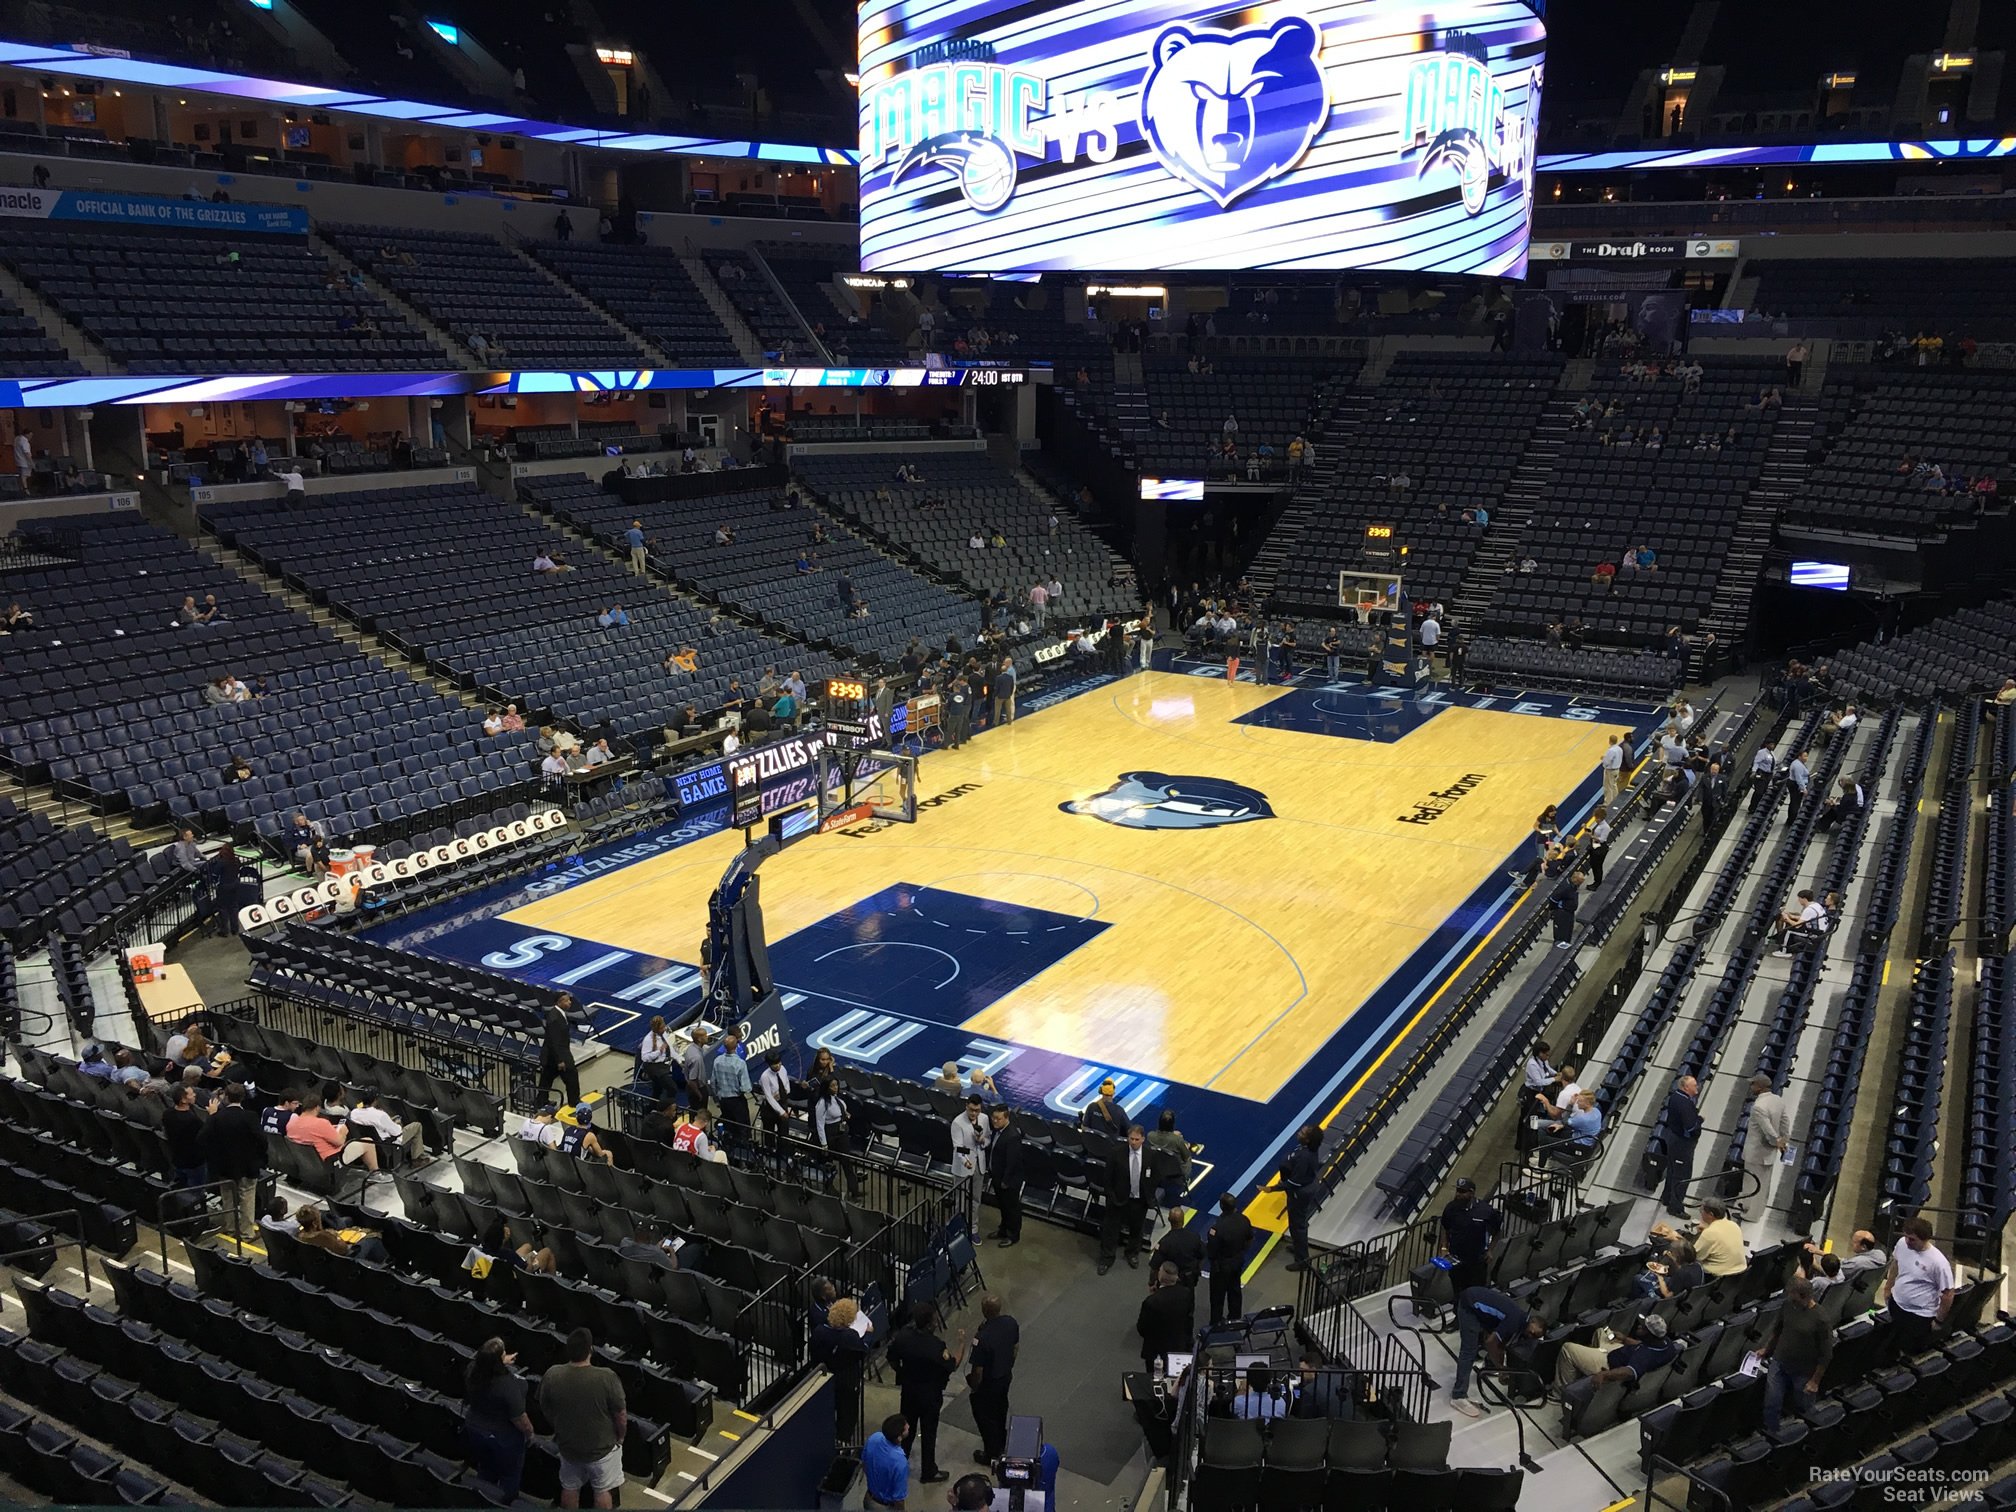 section 111a seat view  for basketball - fedex forum